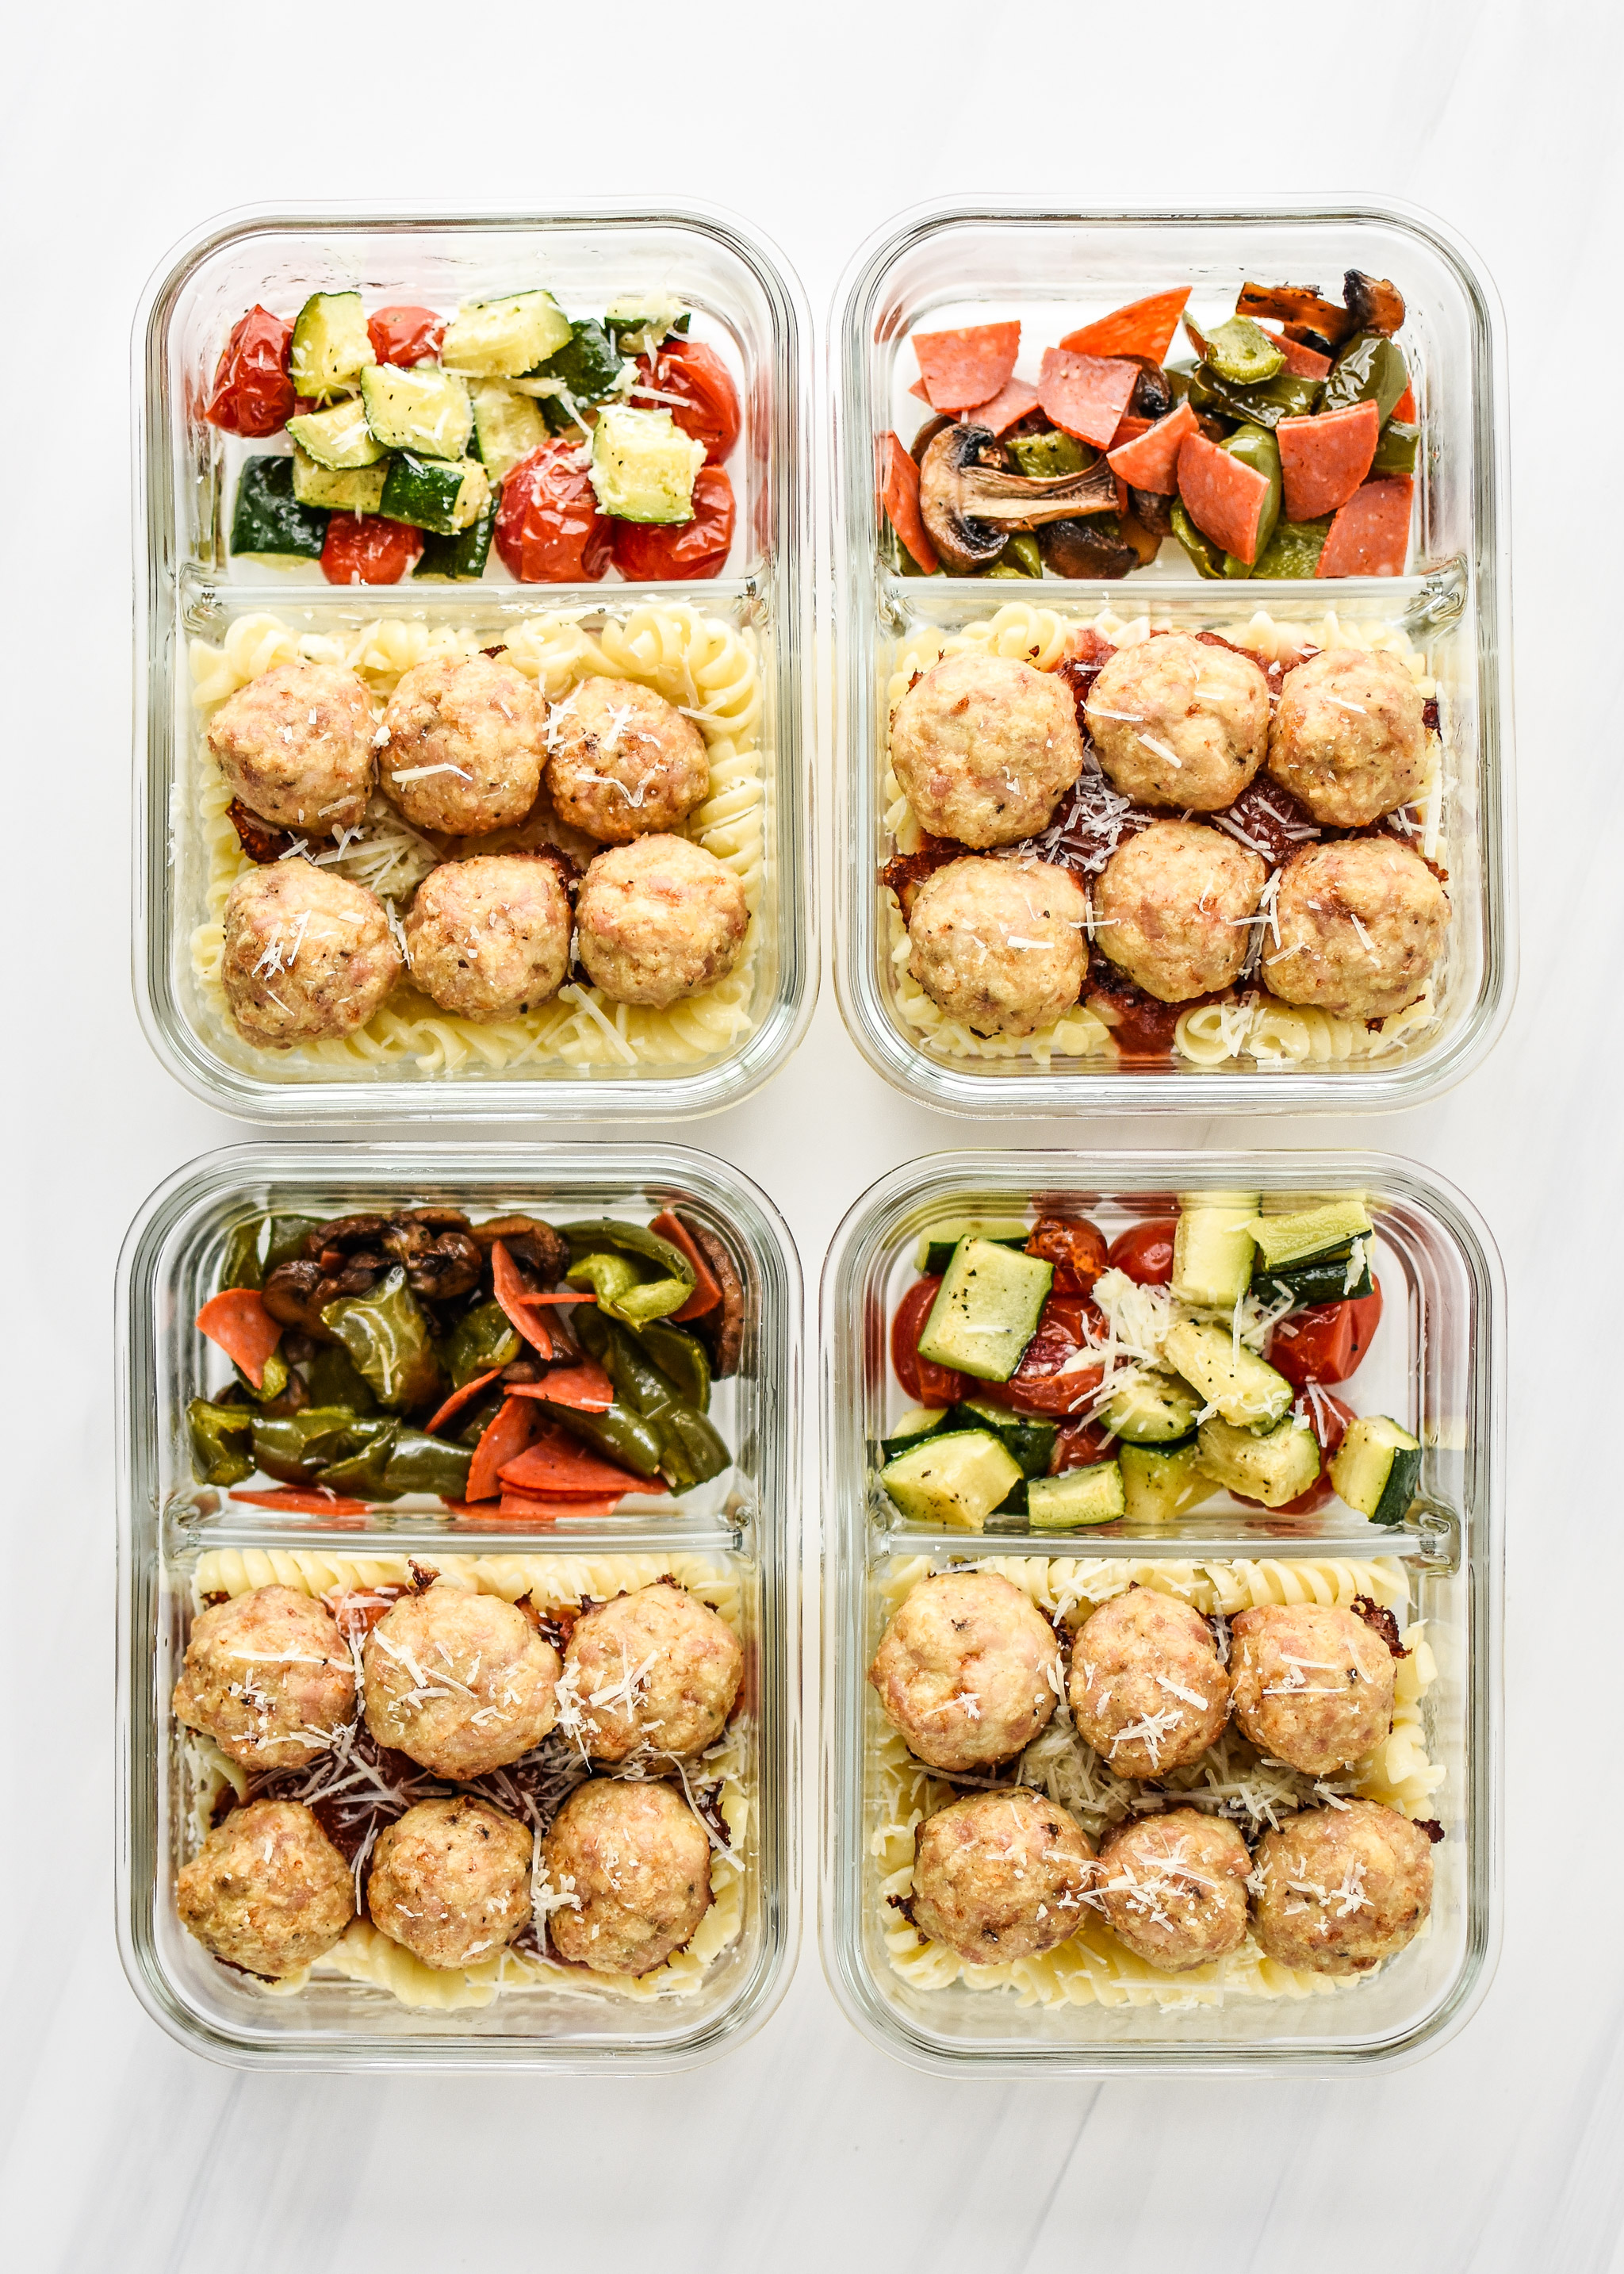 Four portions of the Chicken Meatballs Two Ways Meal Prep Lunches.